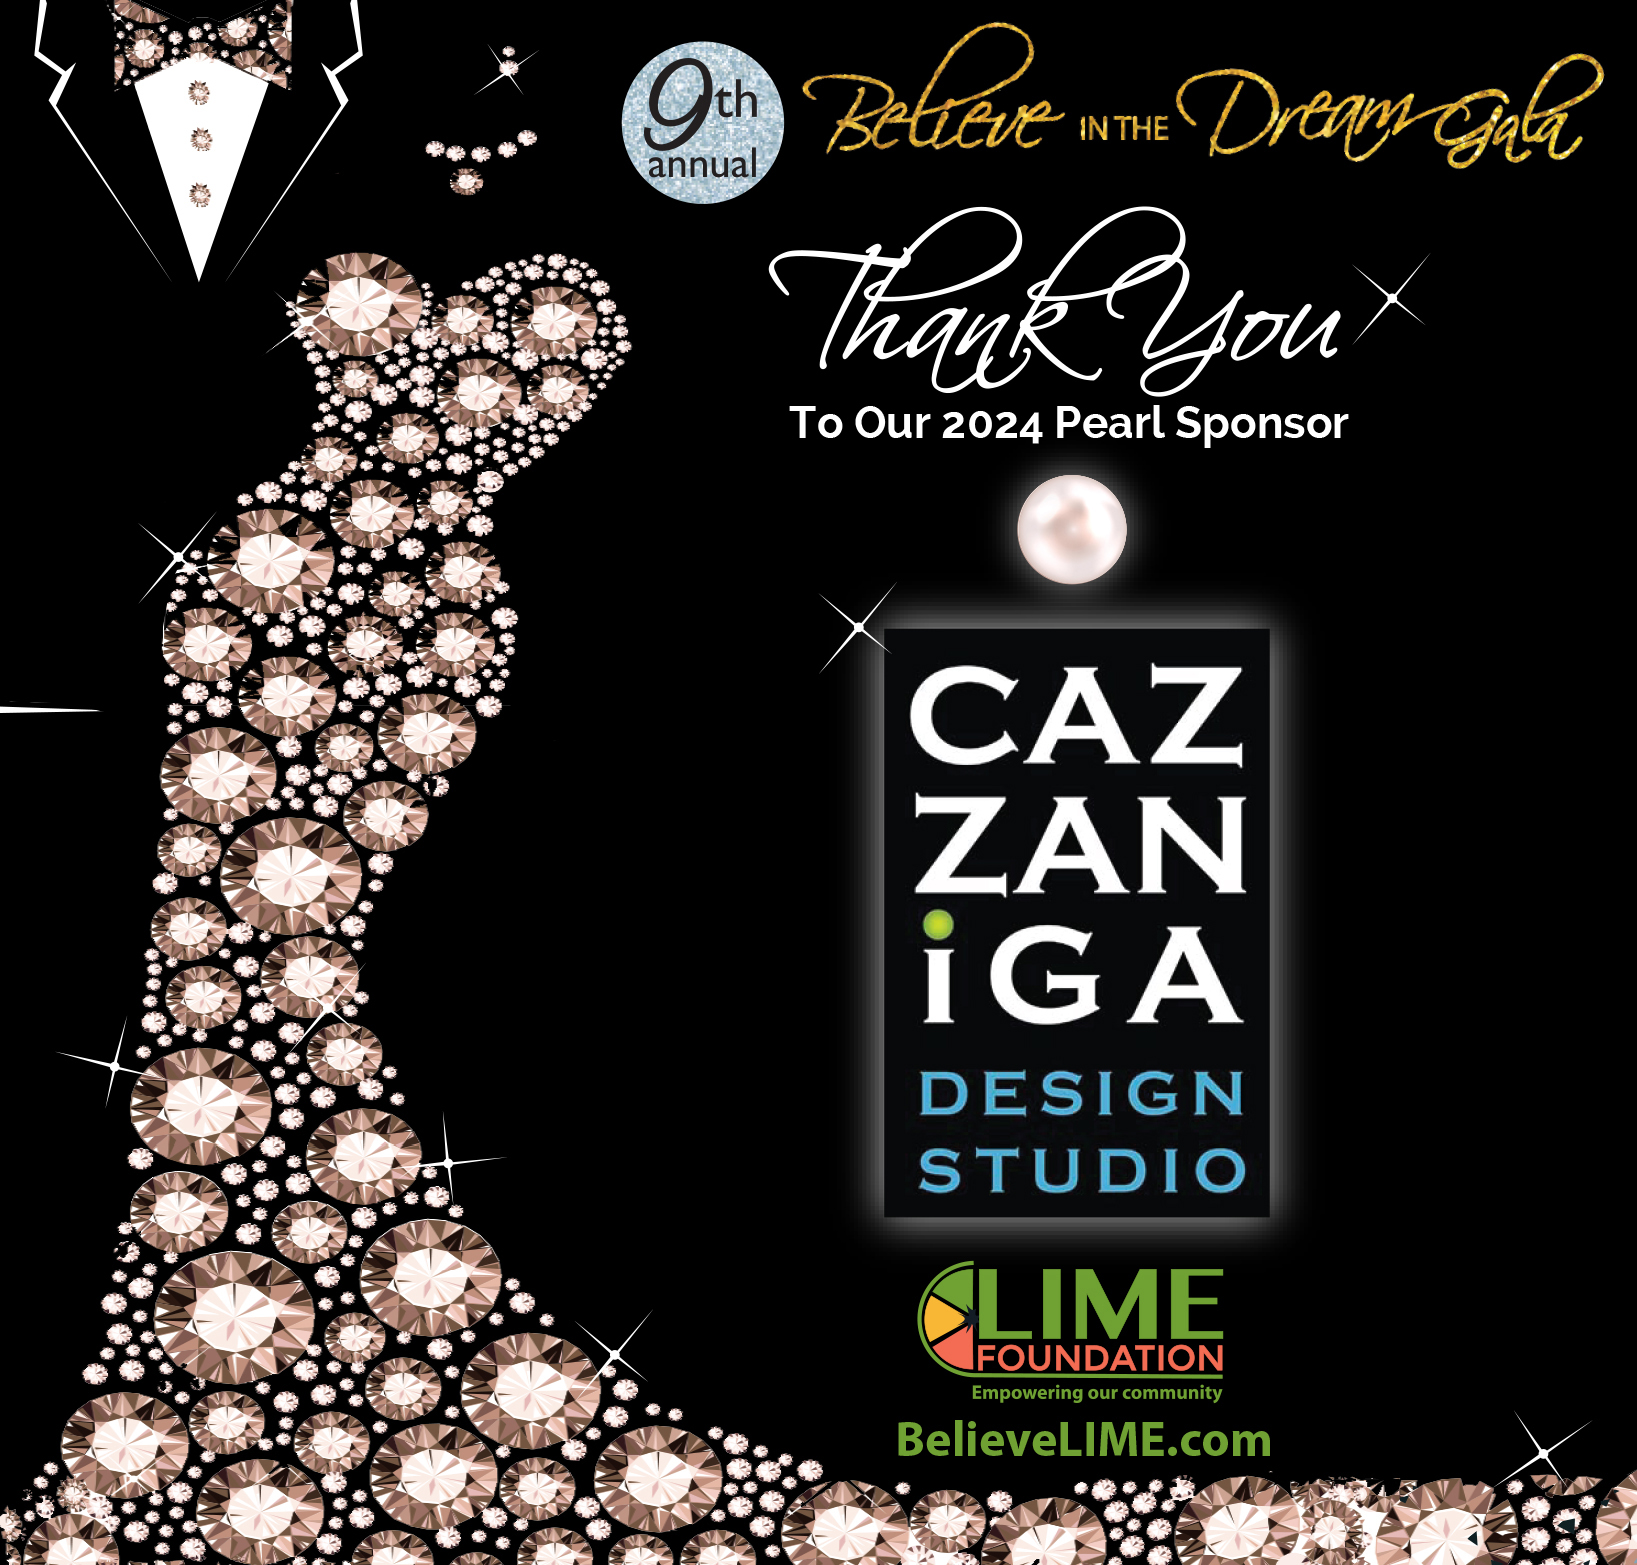 Elegant gala invitation featuring a sparkling silhouette of a woman in a gown made of diamonds, thanking "caz zaniga design studio" and "lime foundation" with logos for their support in making